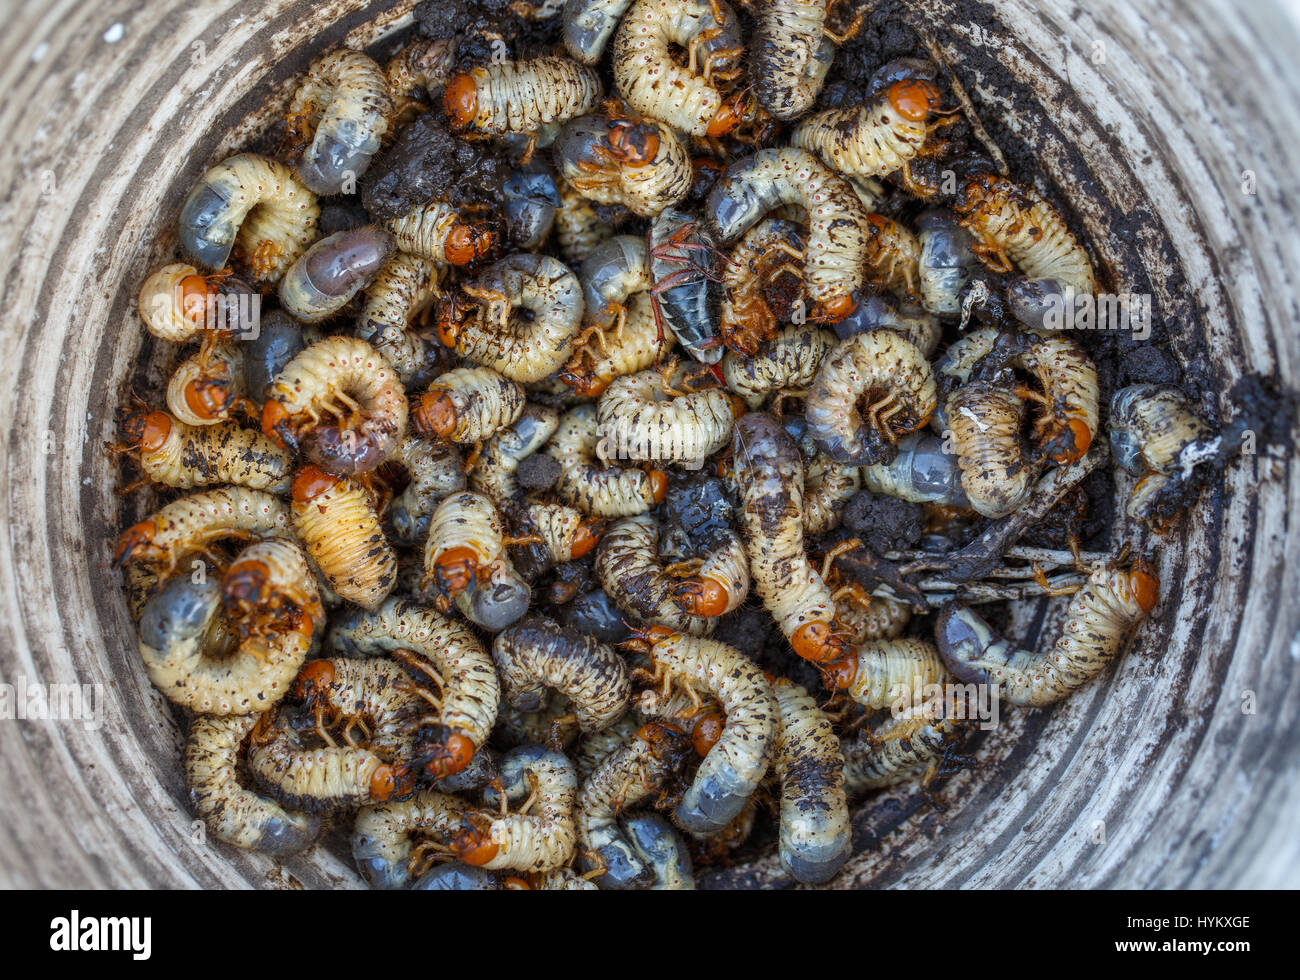 May beetle larvae collected in a bucket Stock Photo